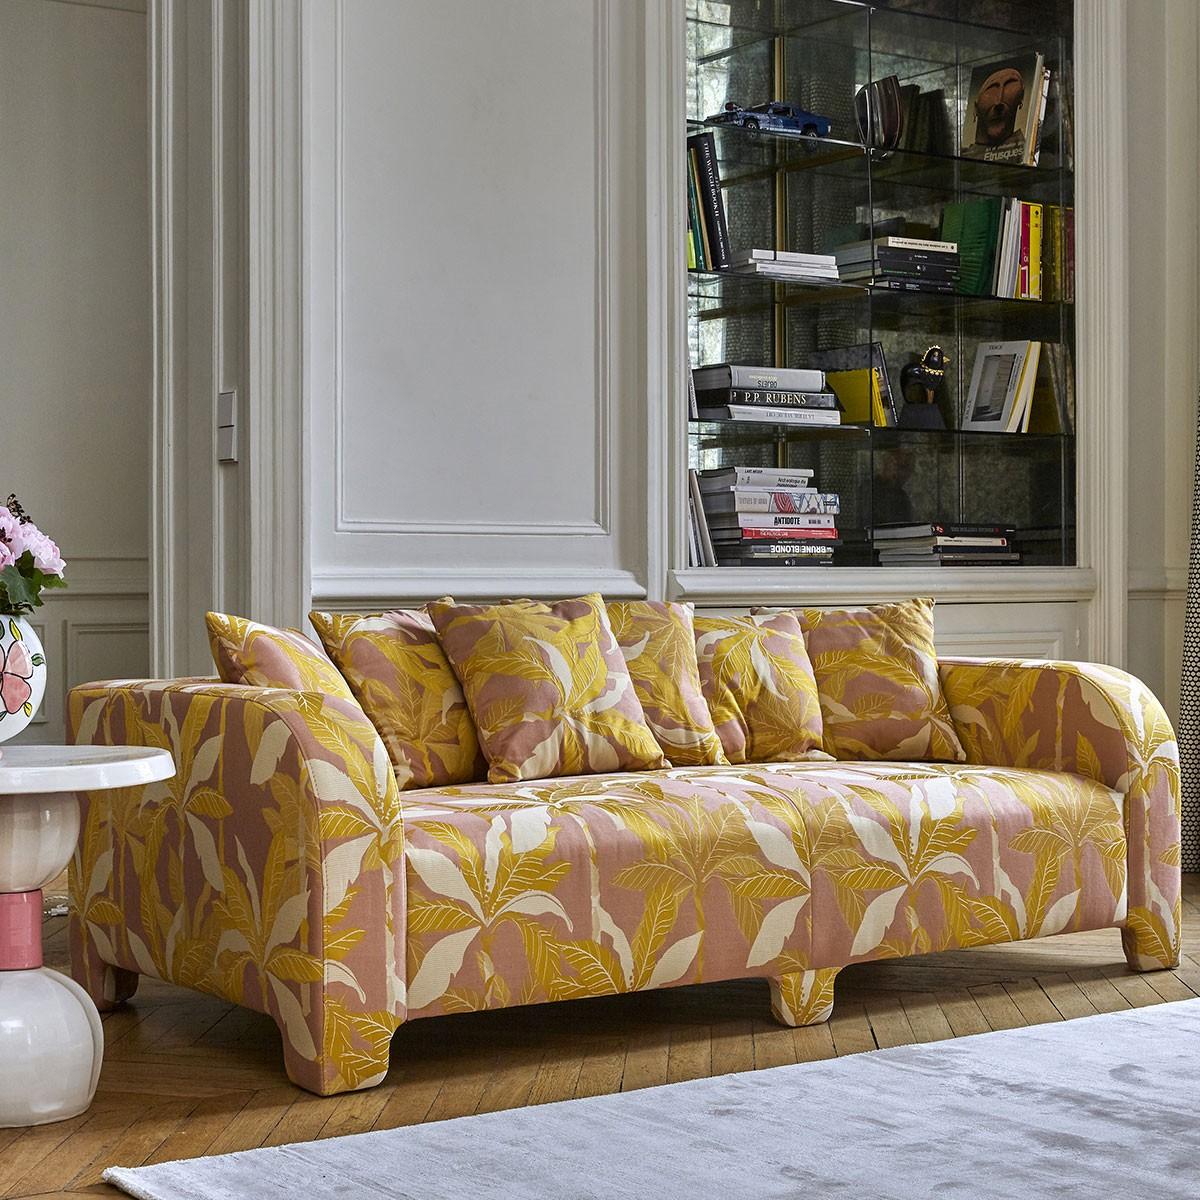 Popus editions Graziella 2 seater sofa in yellow verone velvet upholstery.

A foot that hides another. A cushion that hides another. A curve that hides another with contemporary lines and a base like a punctuation mark, this sofa gives pride of